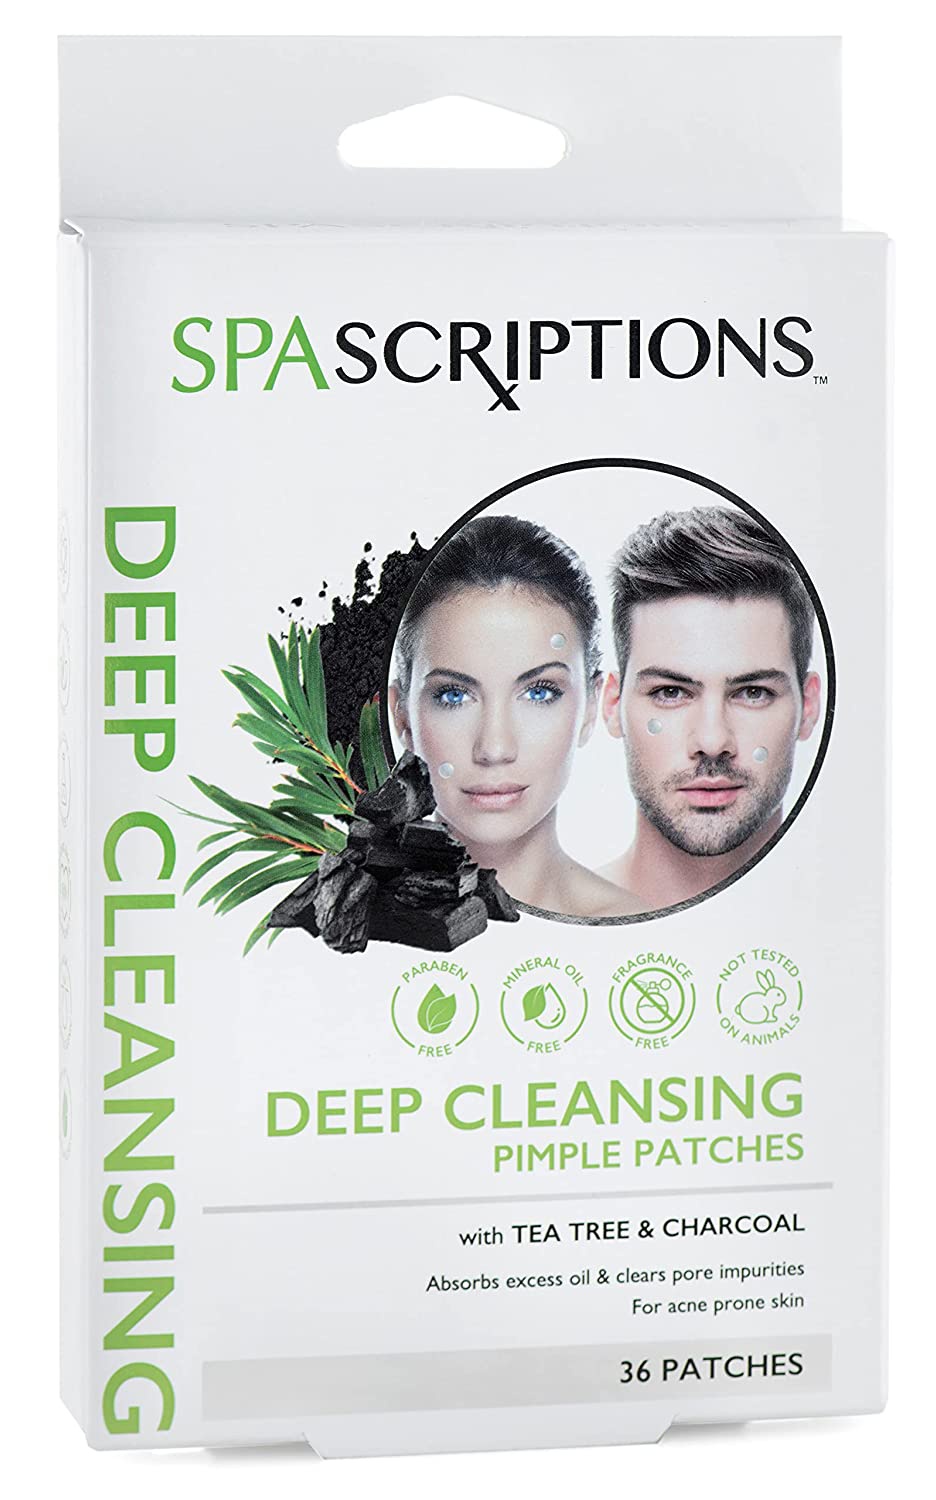 Spascriptions Deep Cleansing Pimple Patches With Tea Tree & Charcoal